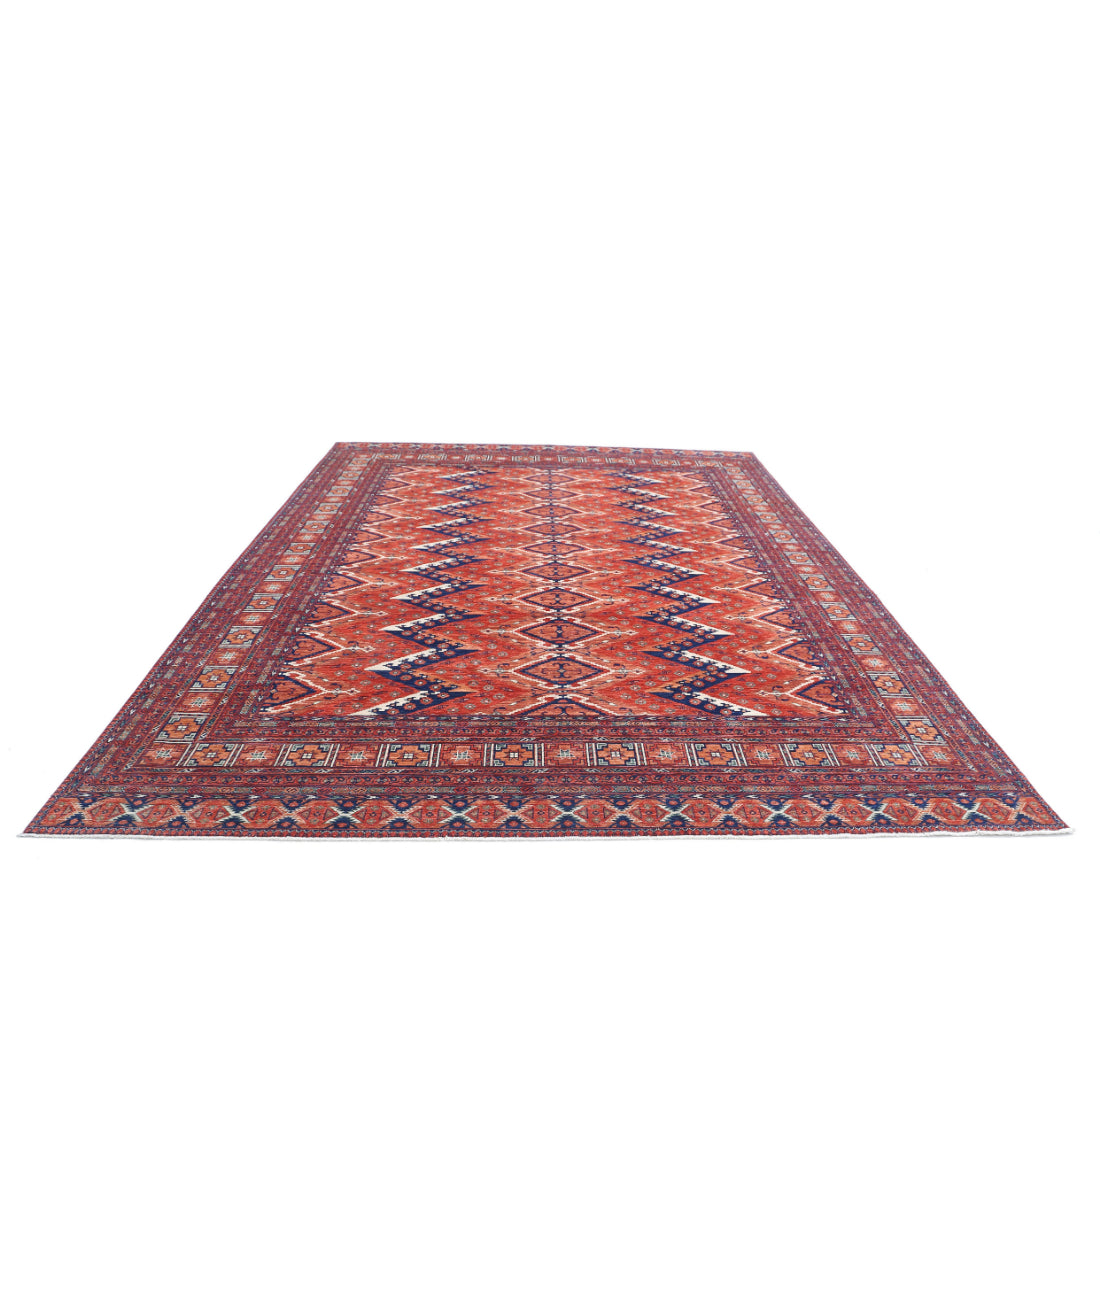 Hand Knotted Nomadic Caucasian Humna Wool Rug - 10'0'' x 13'8'' 10'0'' x 13'8'' (300 X 410) / Multi / Red